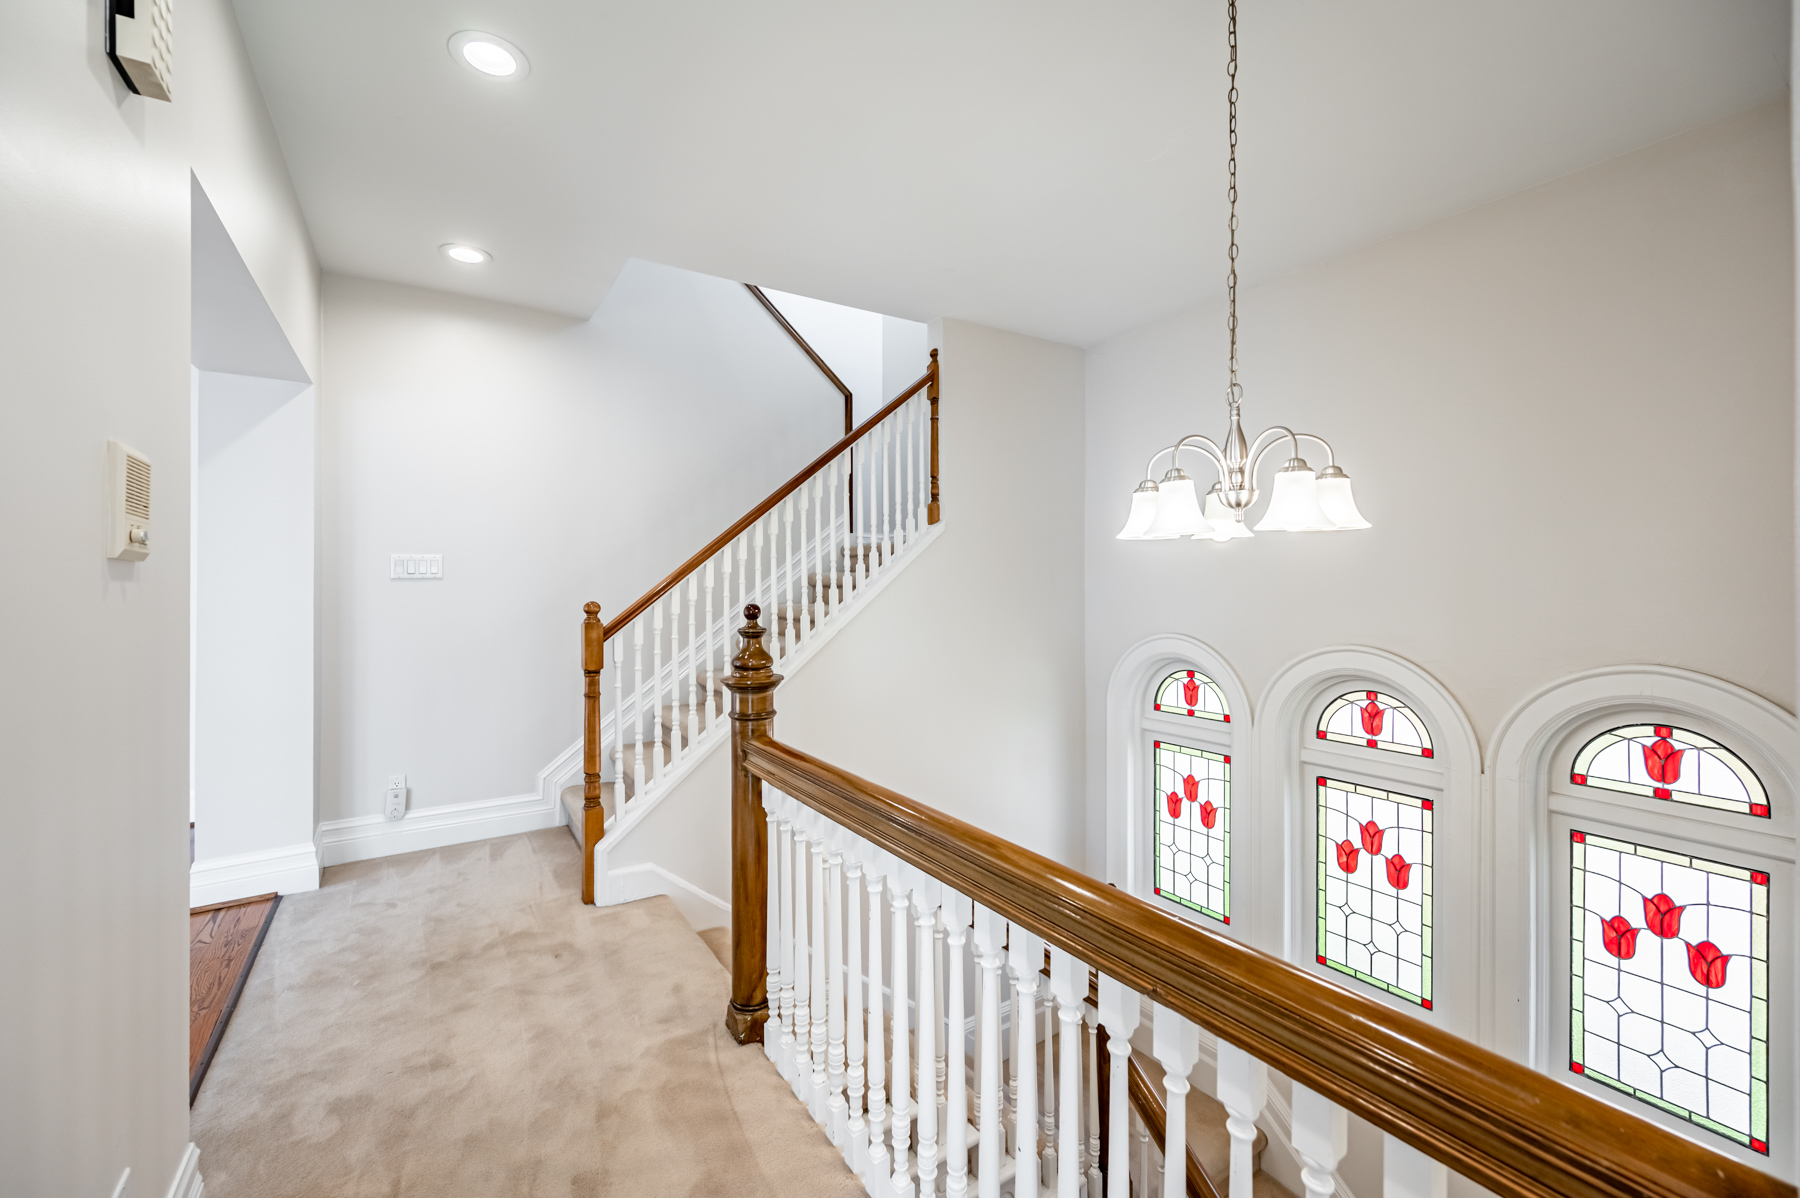 House stairway with shiny wood banisters, silver chandelier, pot-lights and stained glass windows.